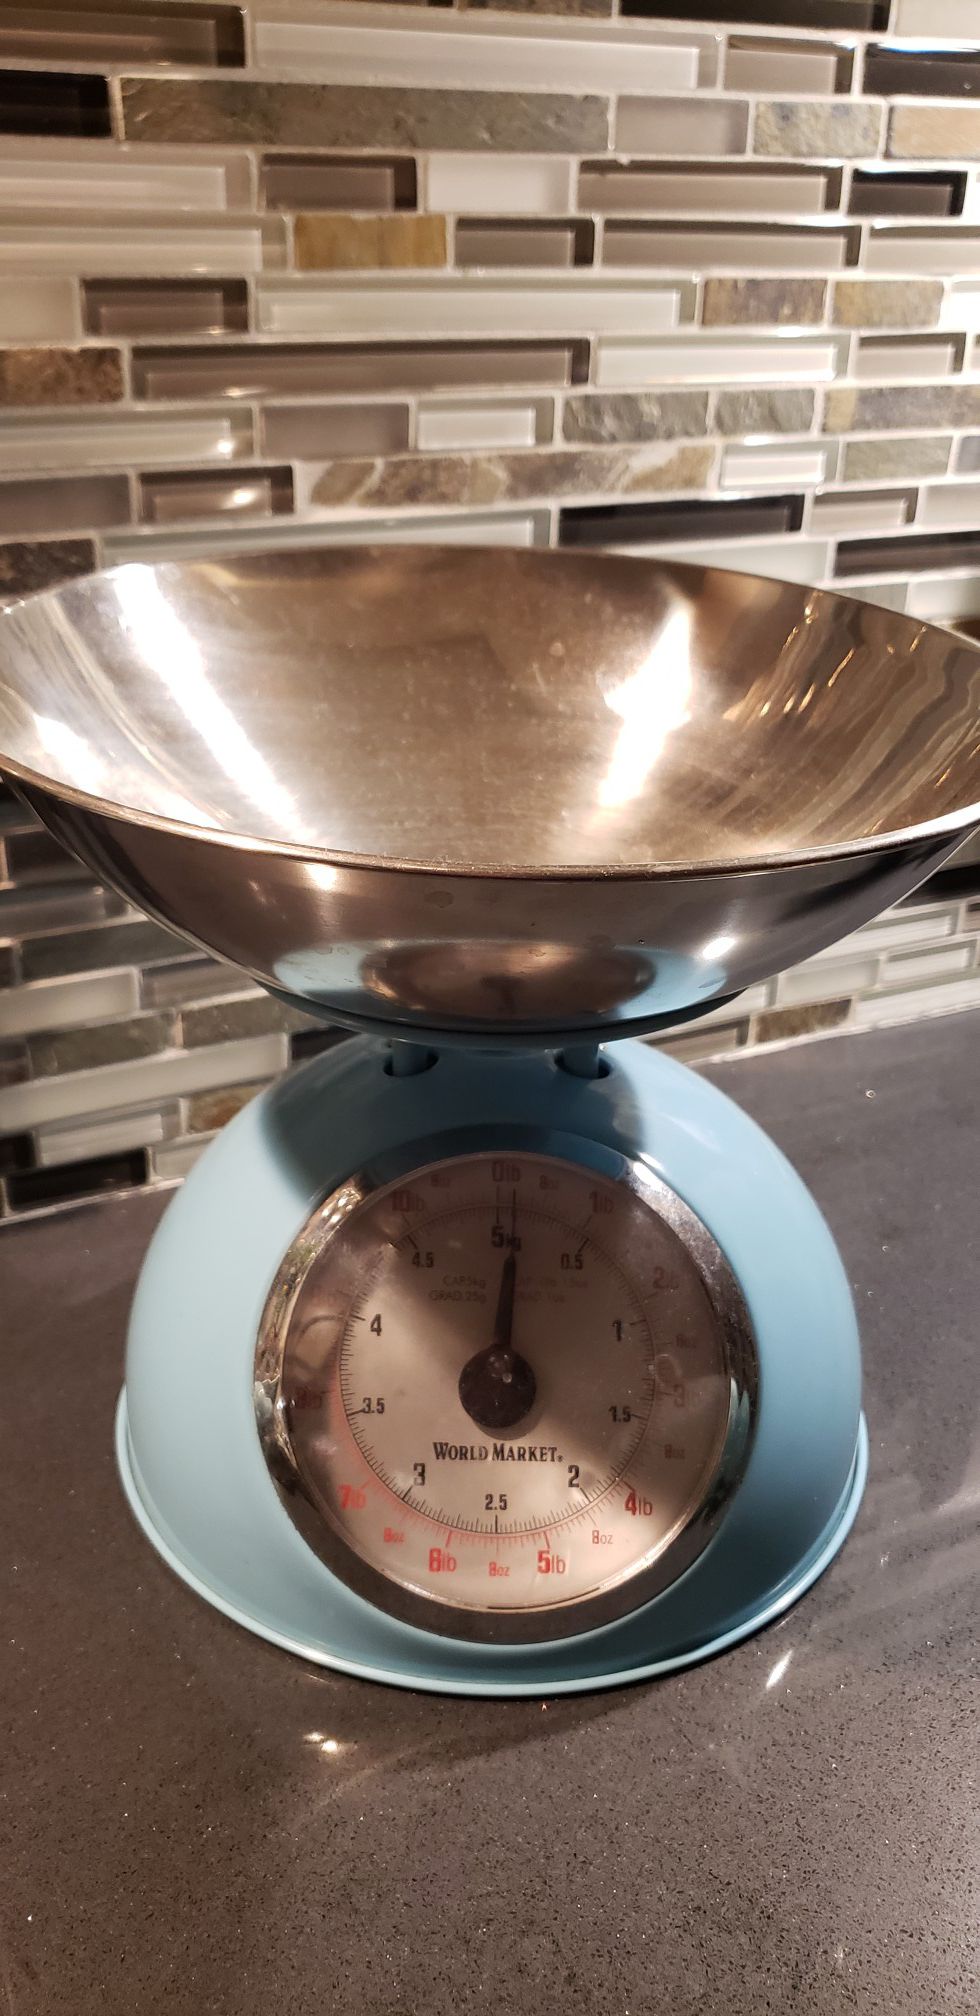 Pier 1 turquoise teal working kitchen scale